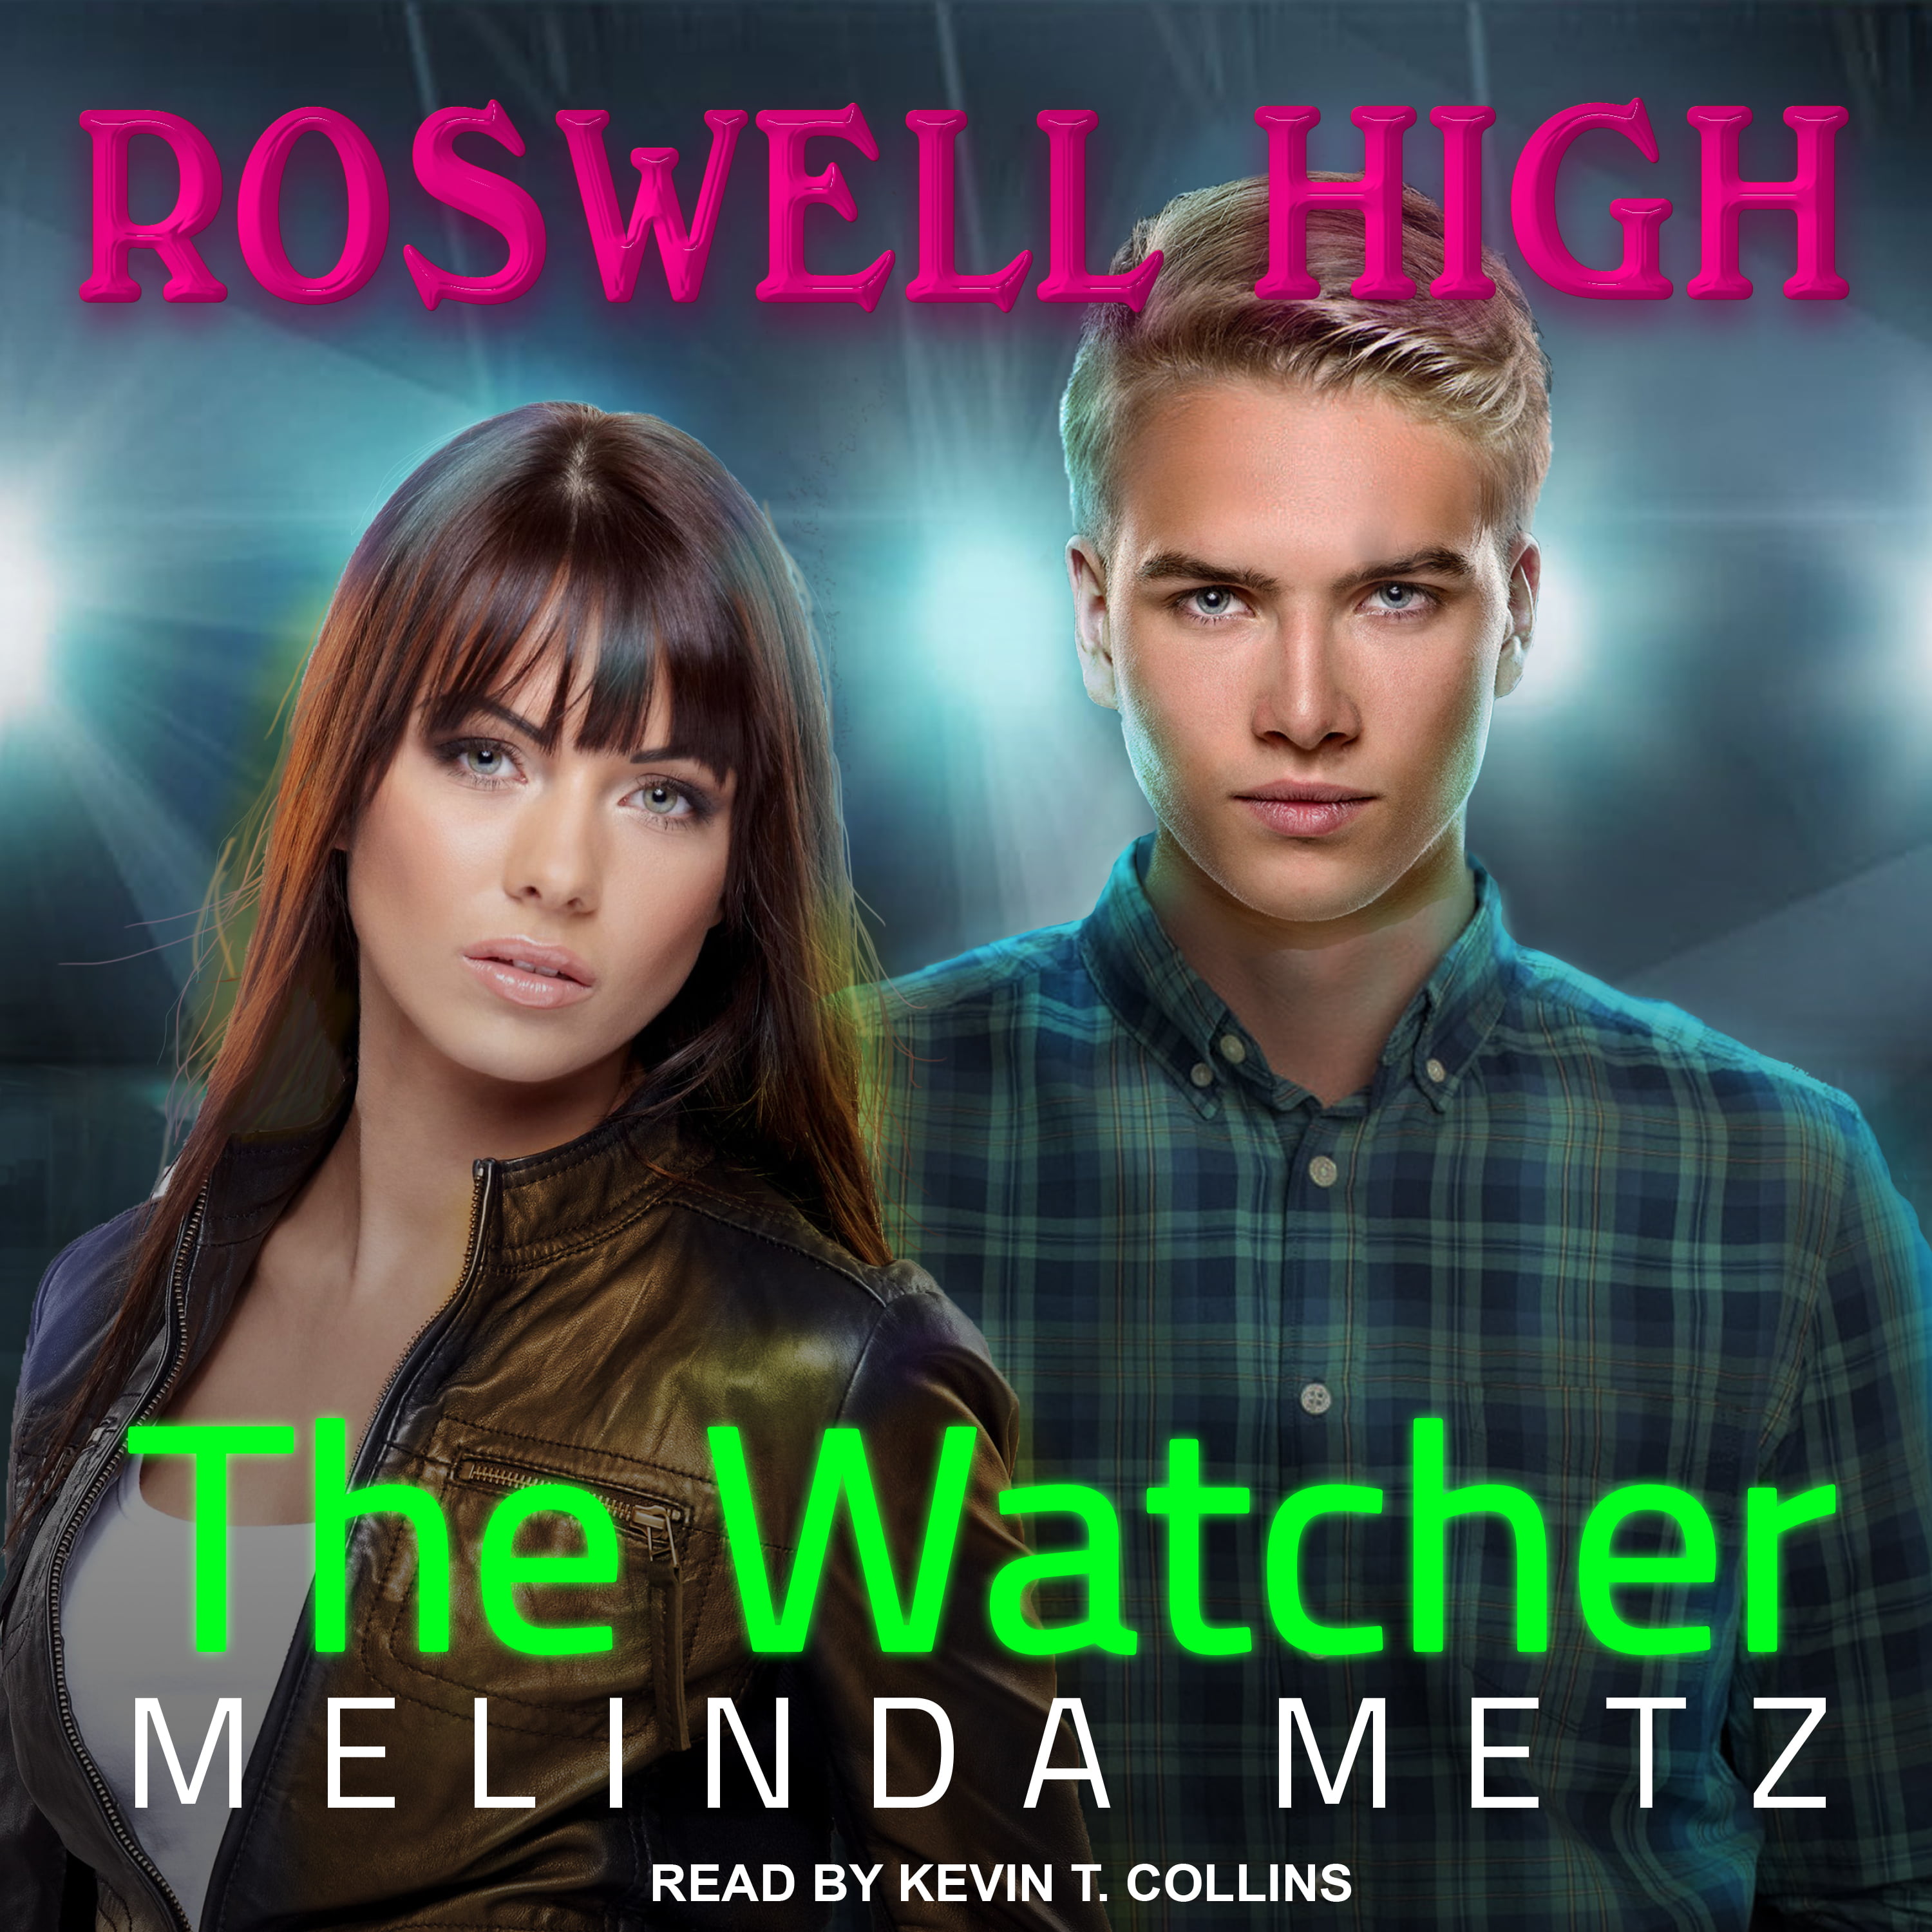 Roswell High 5 in 1 by Melinda Metz